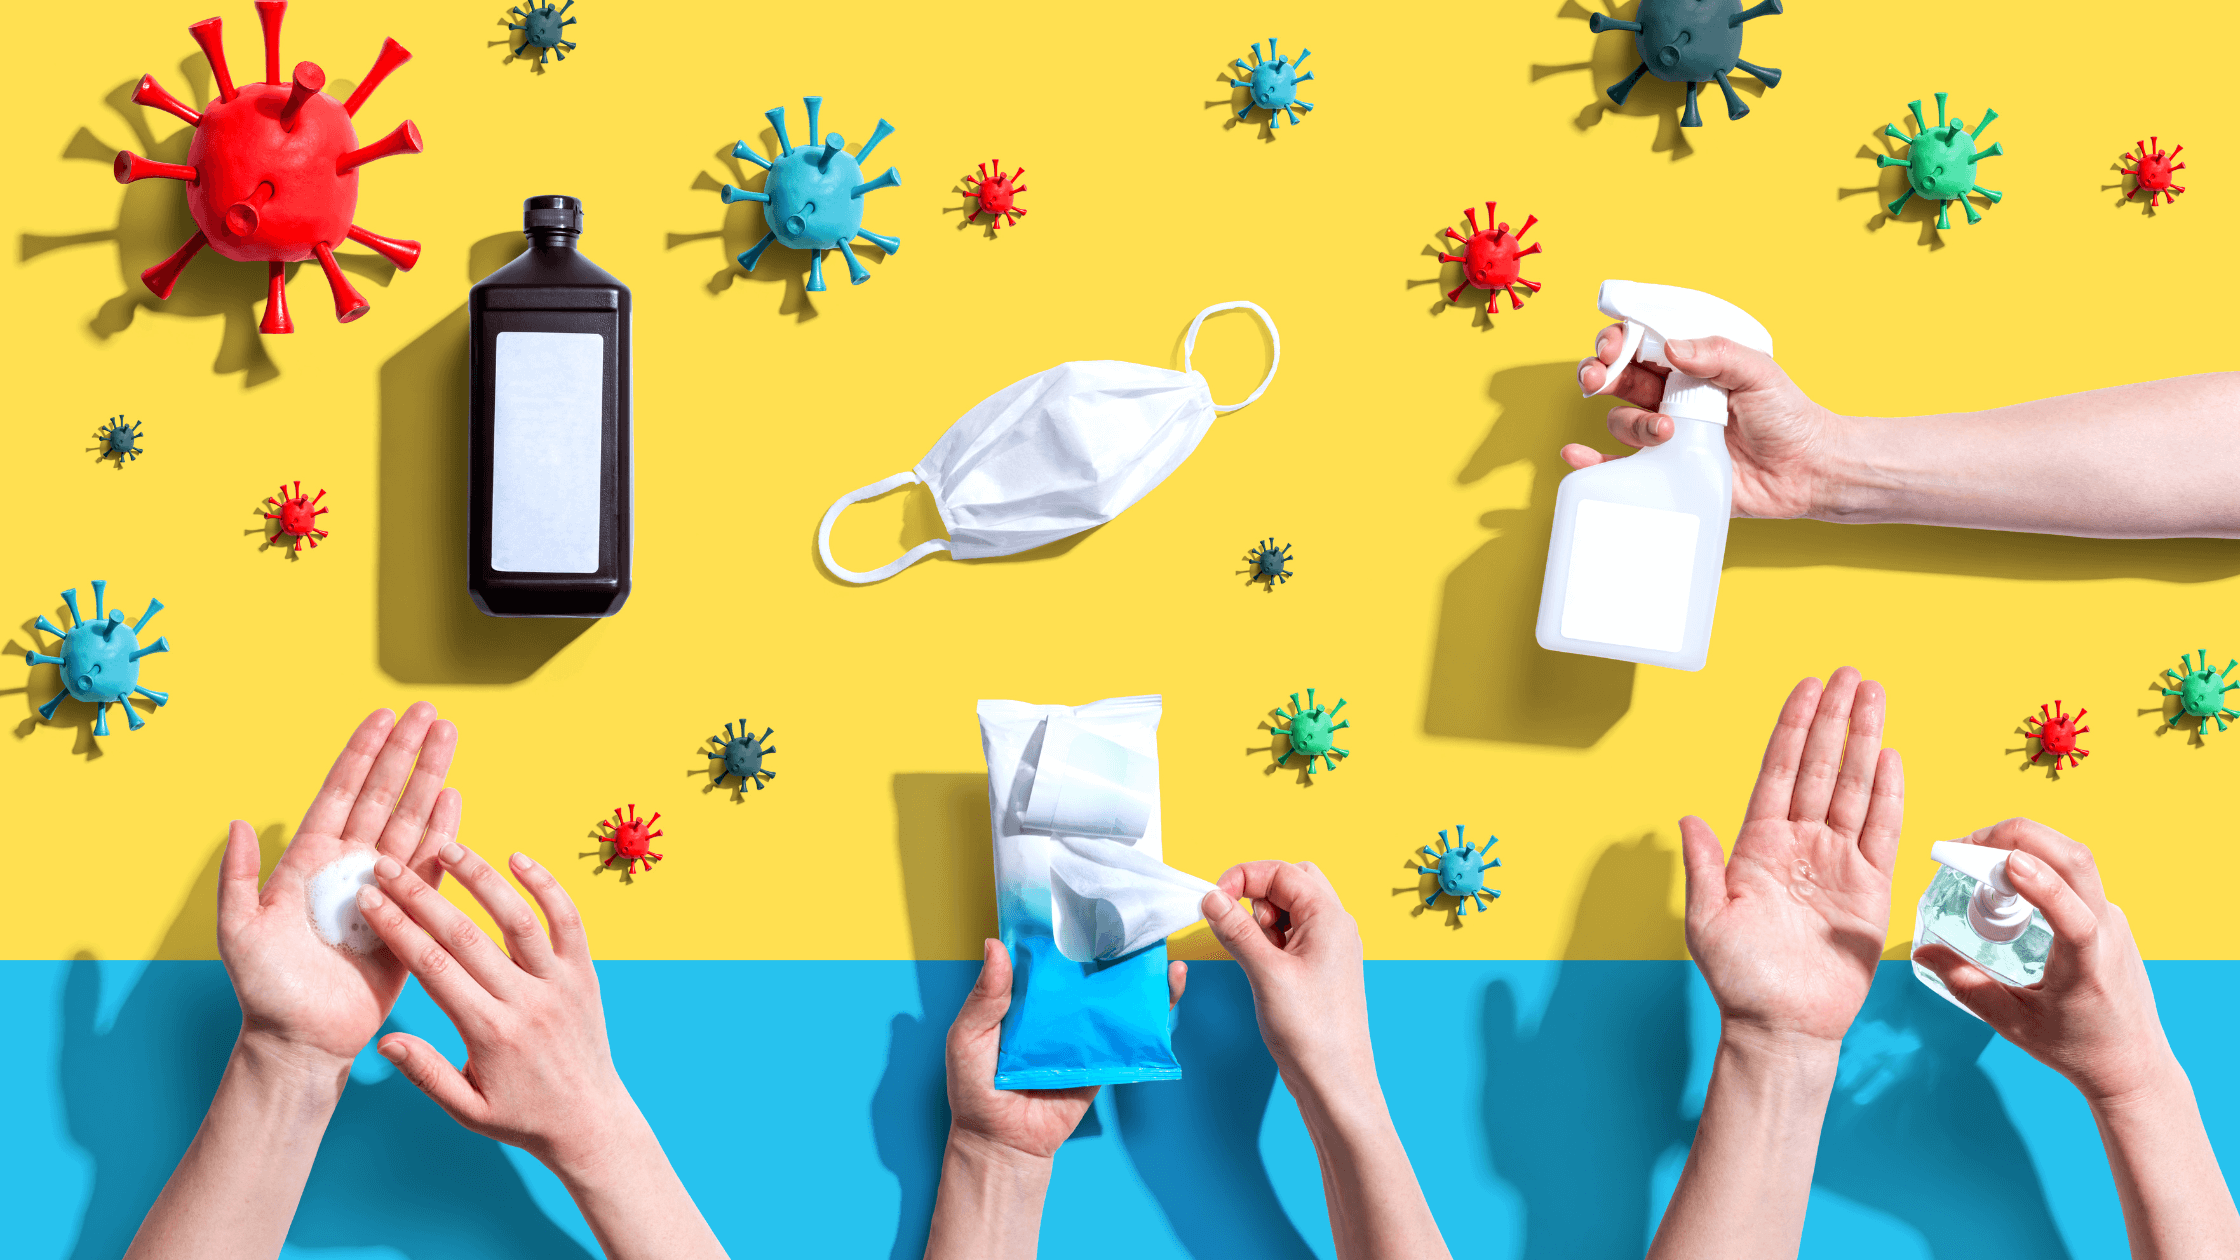 hands and germs on a display with a yellow background and various cleaning supplies